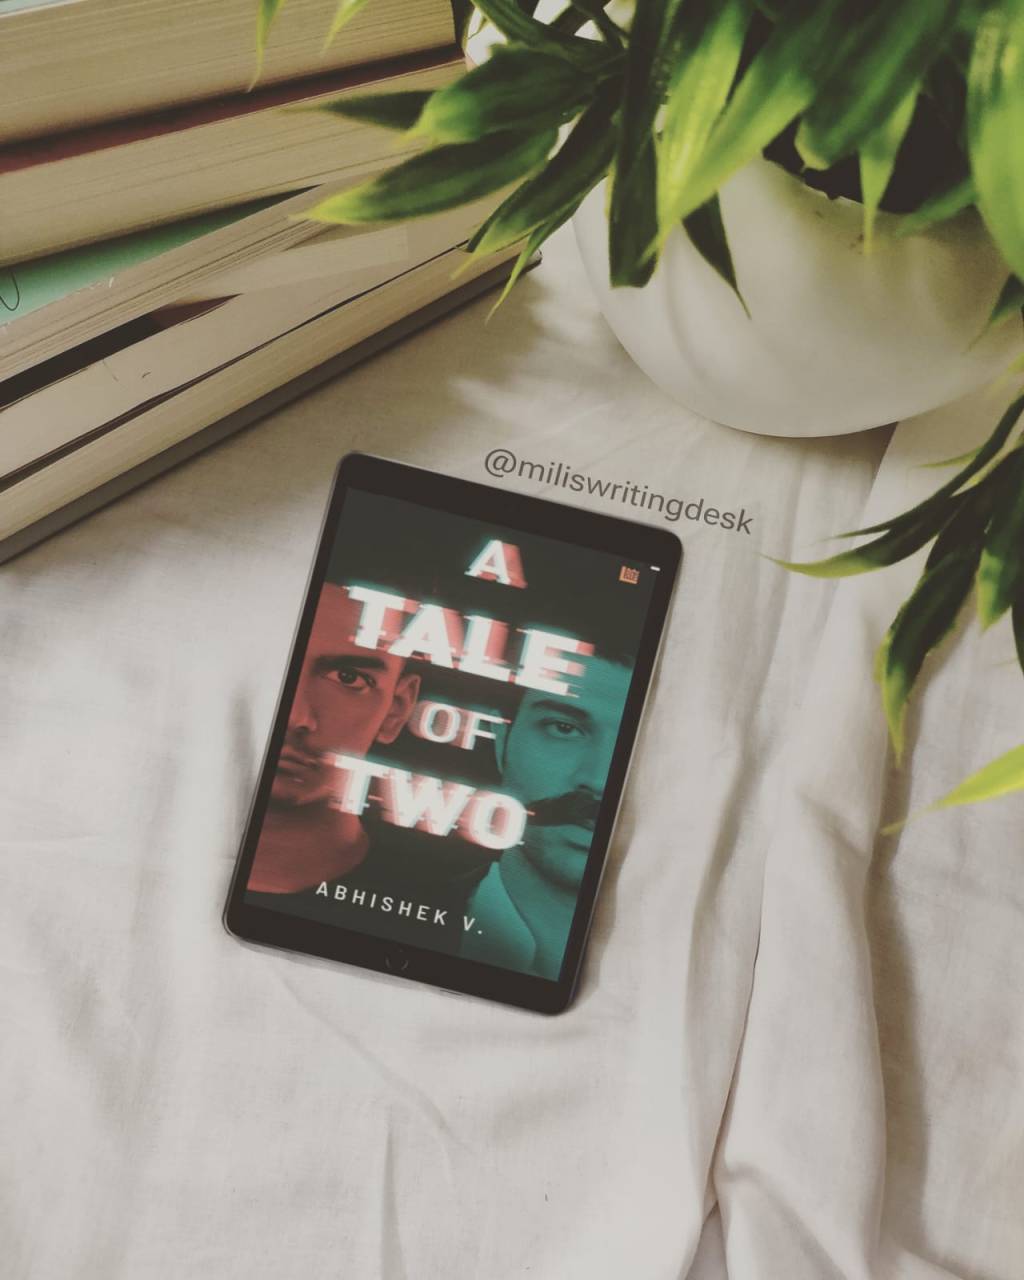 Do you like reading Gangster fight and Court room dramas? Then read “A Tale Of Two” by Abhishek V. – Book Review